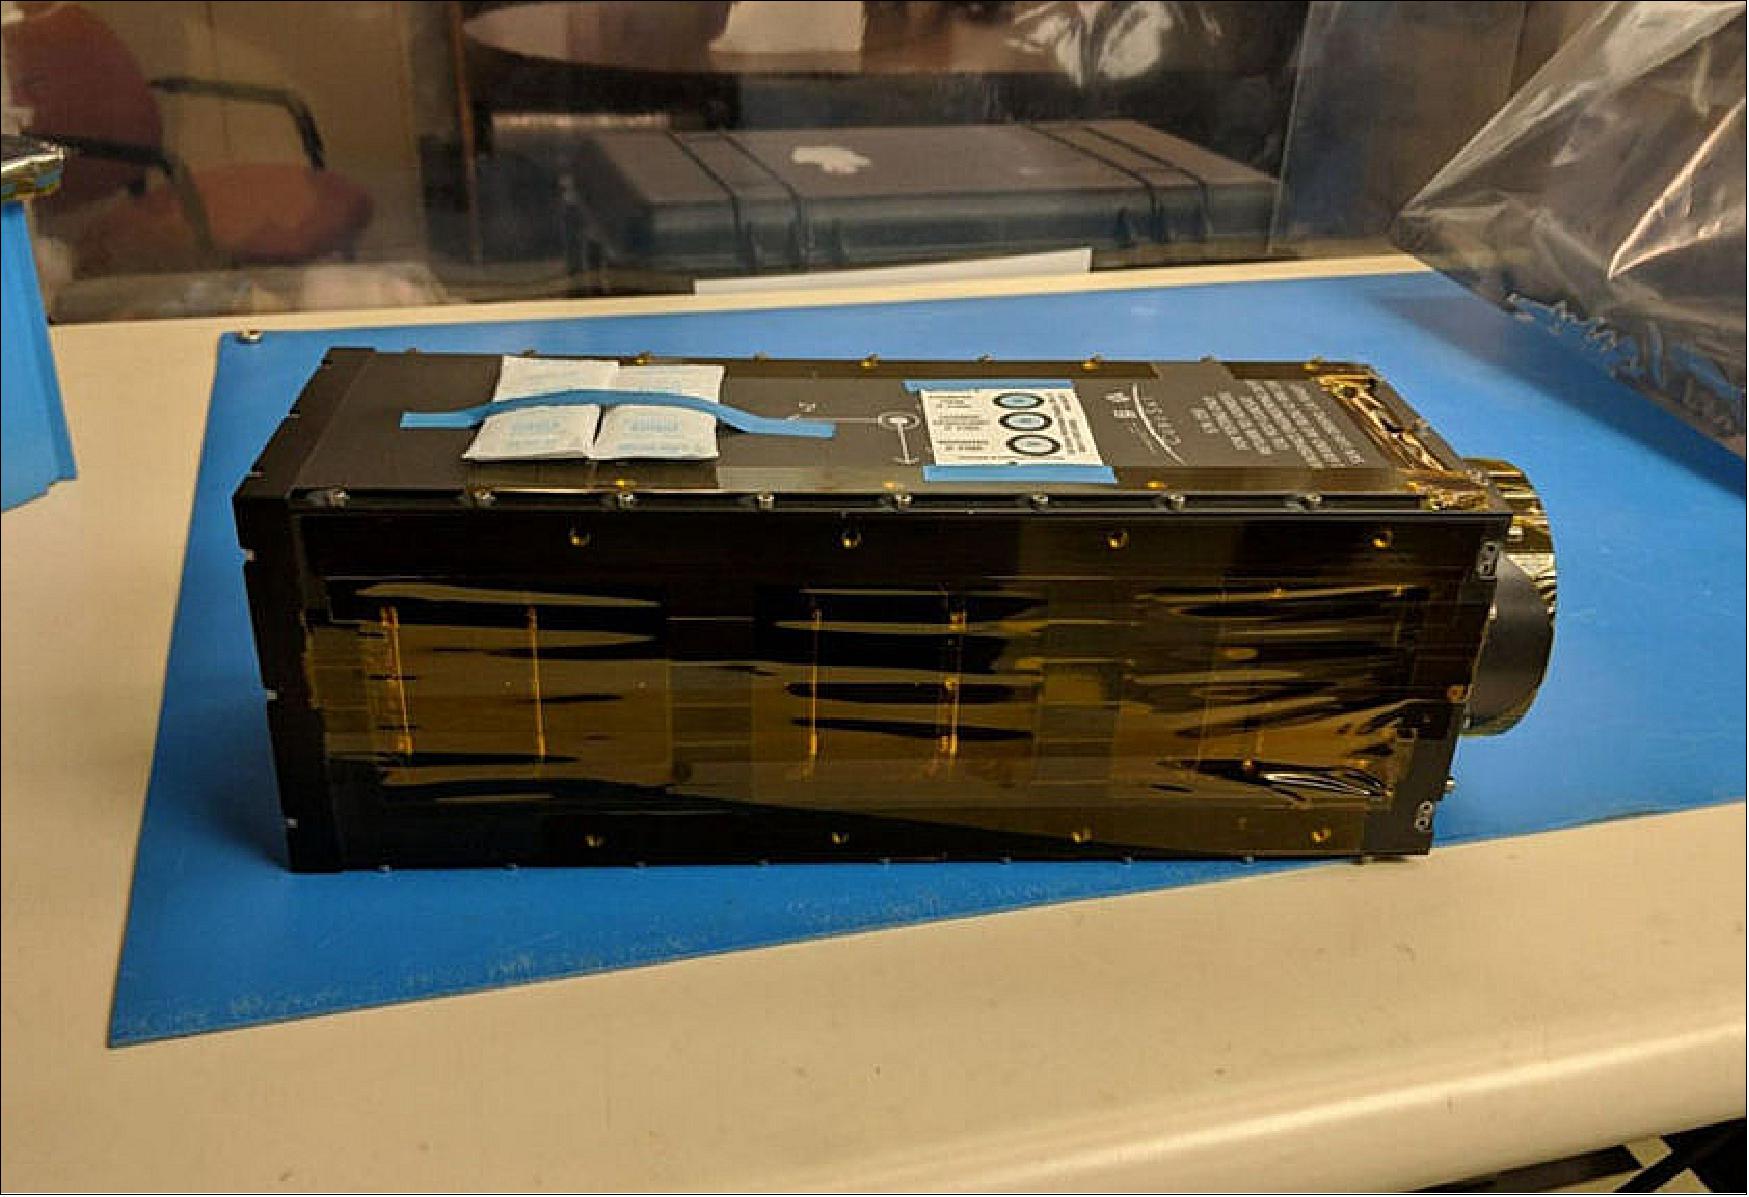 Figure 6: LightSail-2 sits inside its P-POD at the Cal Poly San Luis Obispo CubeSat clean room on 6 May 2019 prior to final shipment to the Air Force Research Laboratory (AFRL) in Albuquerque, New Mexico (image credit: Ryan Nugent / Cal Poly SLO / The Planetary Society)